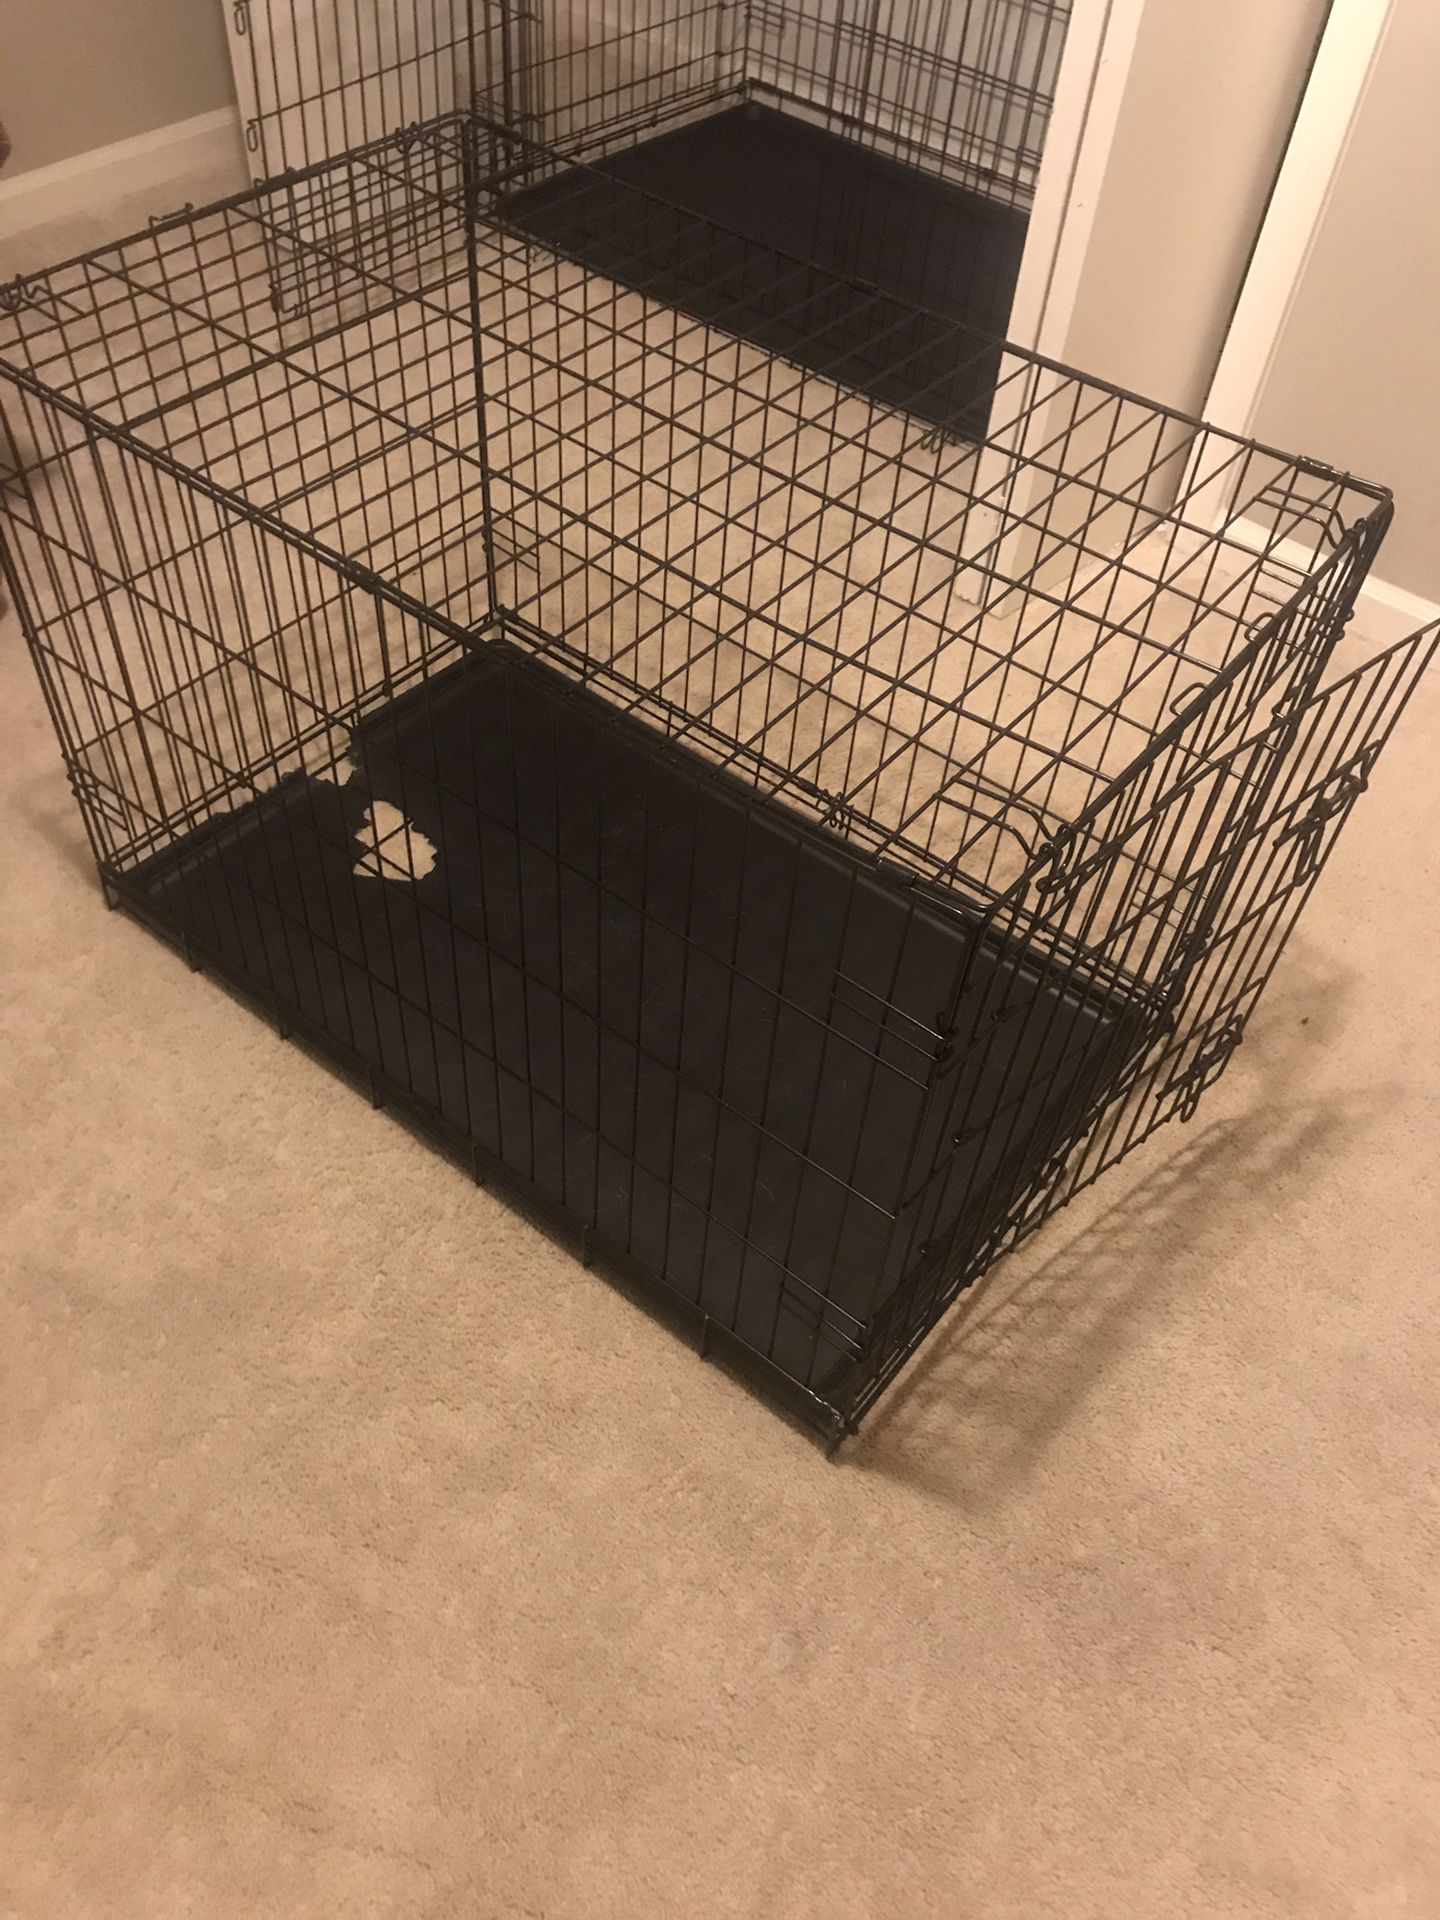 Large 36” dog crate